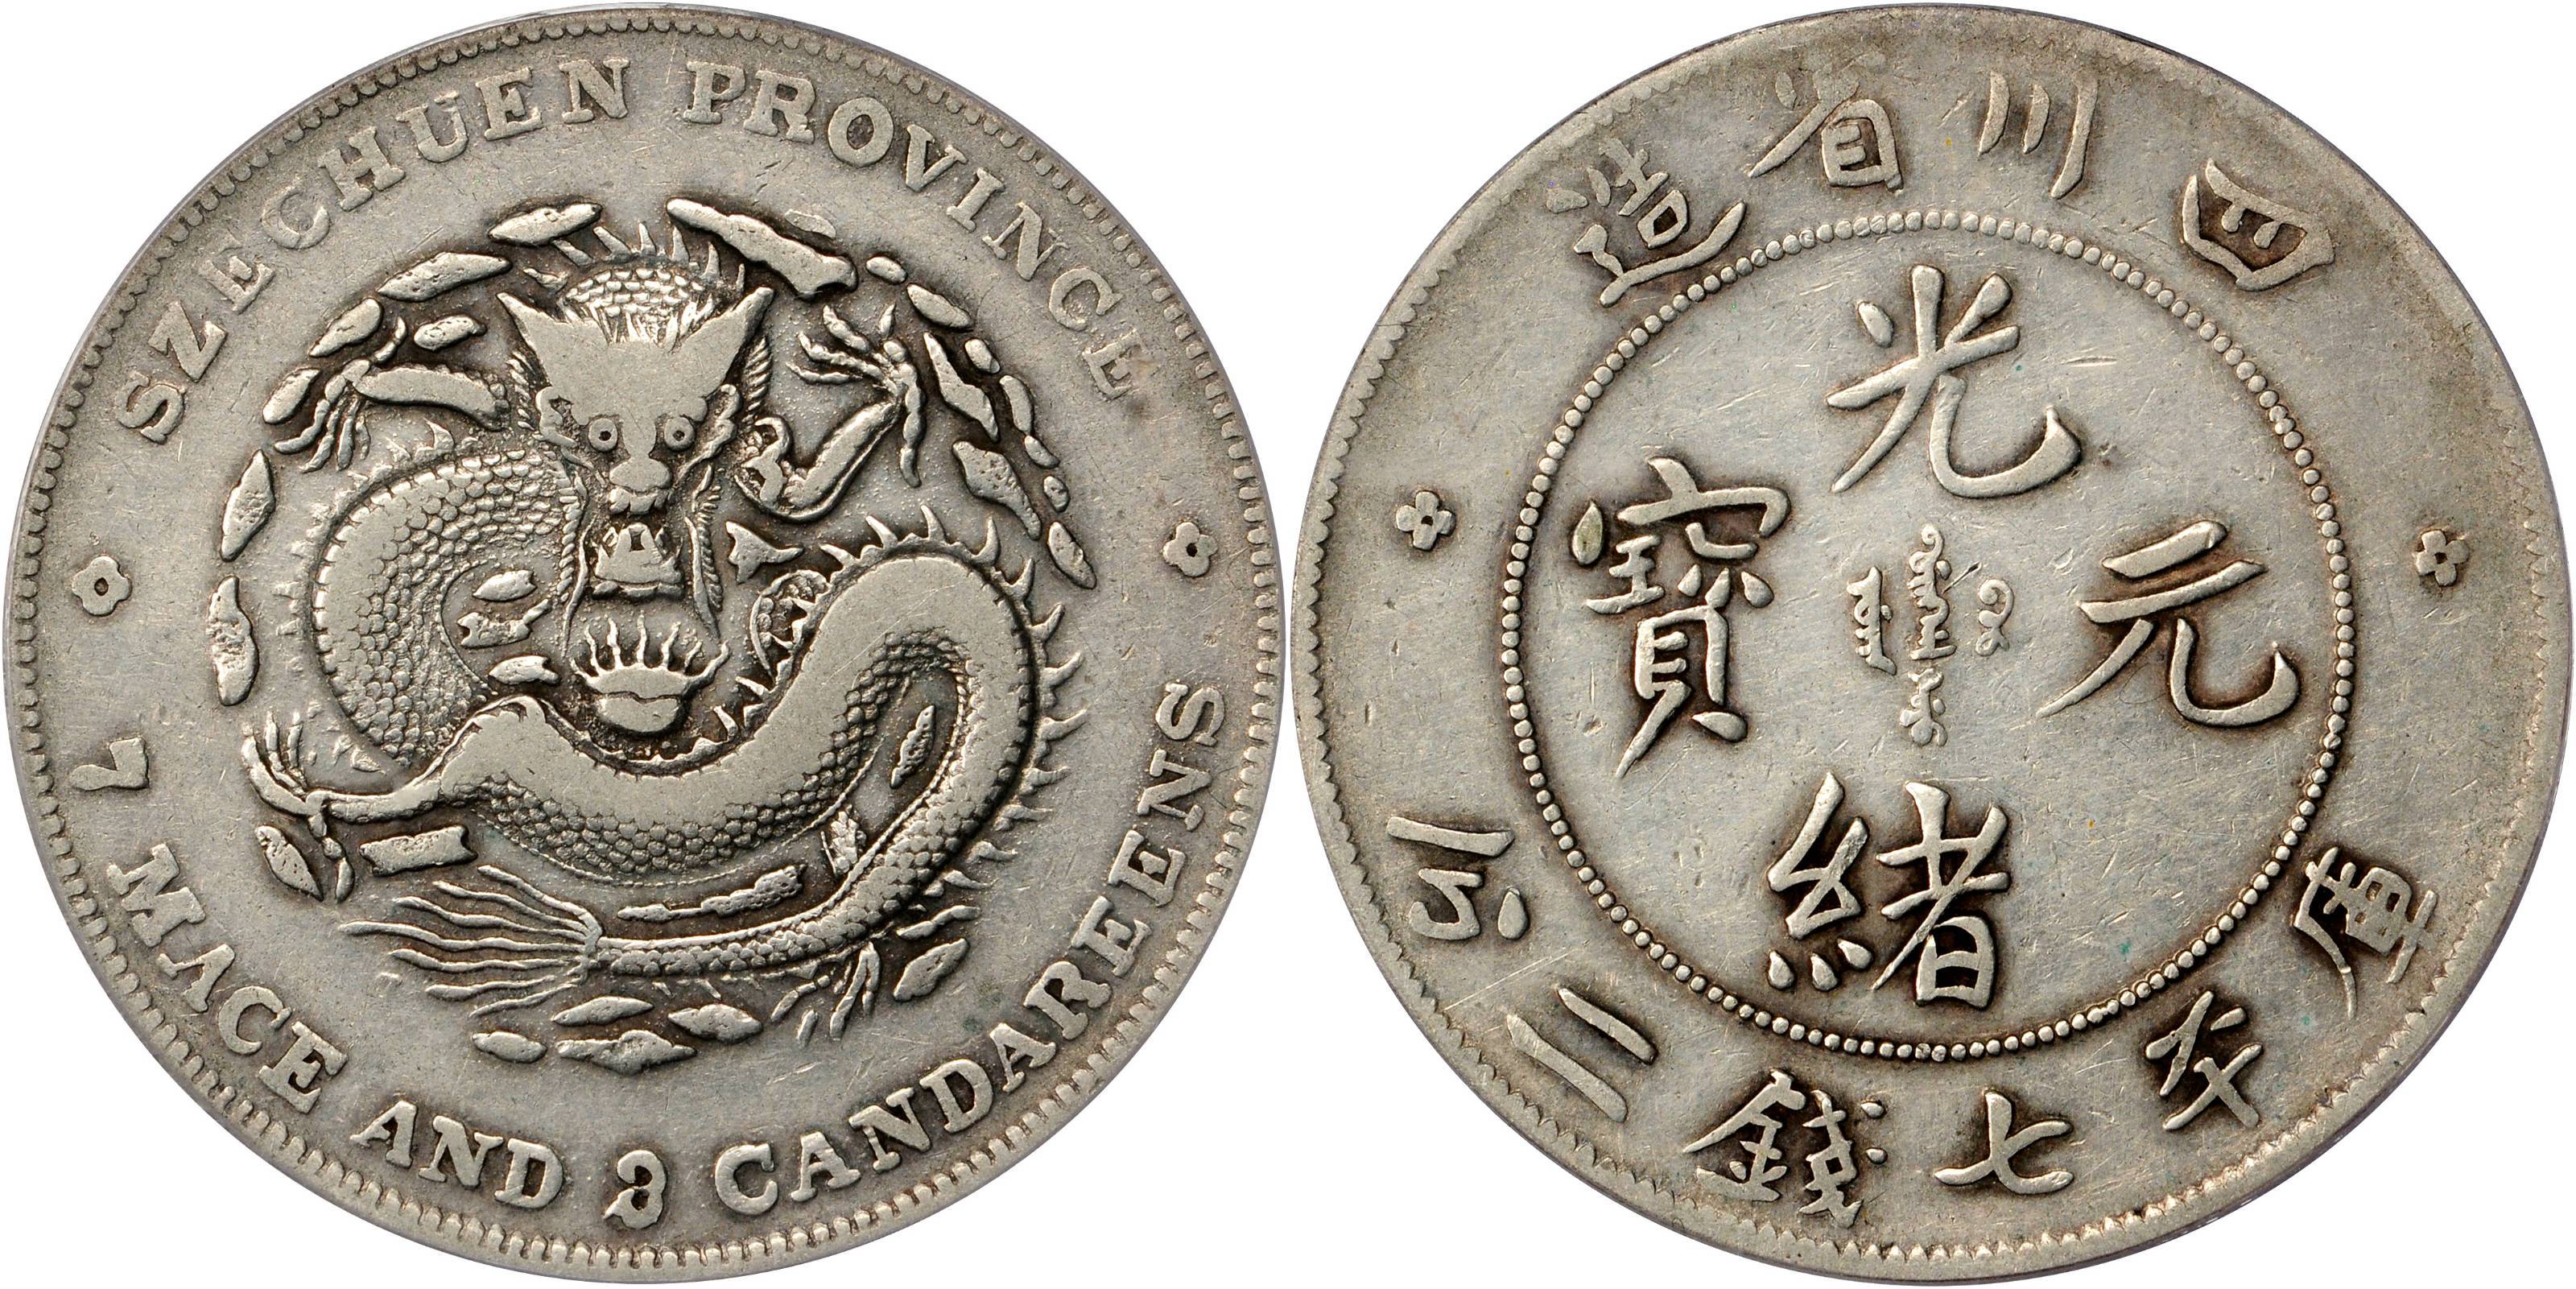 The china coin